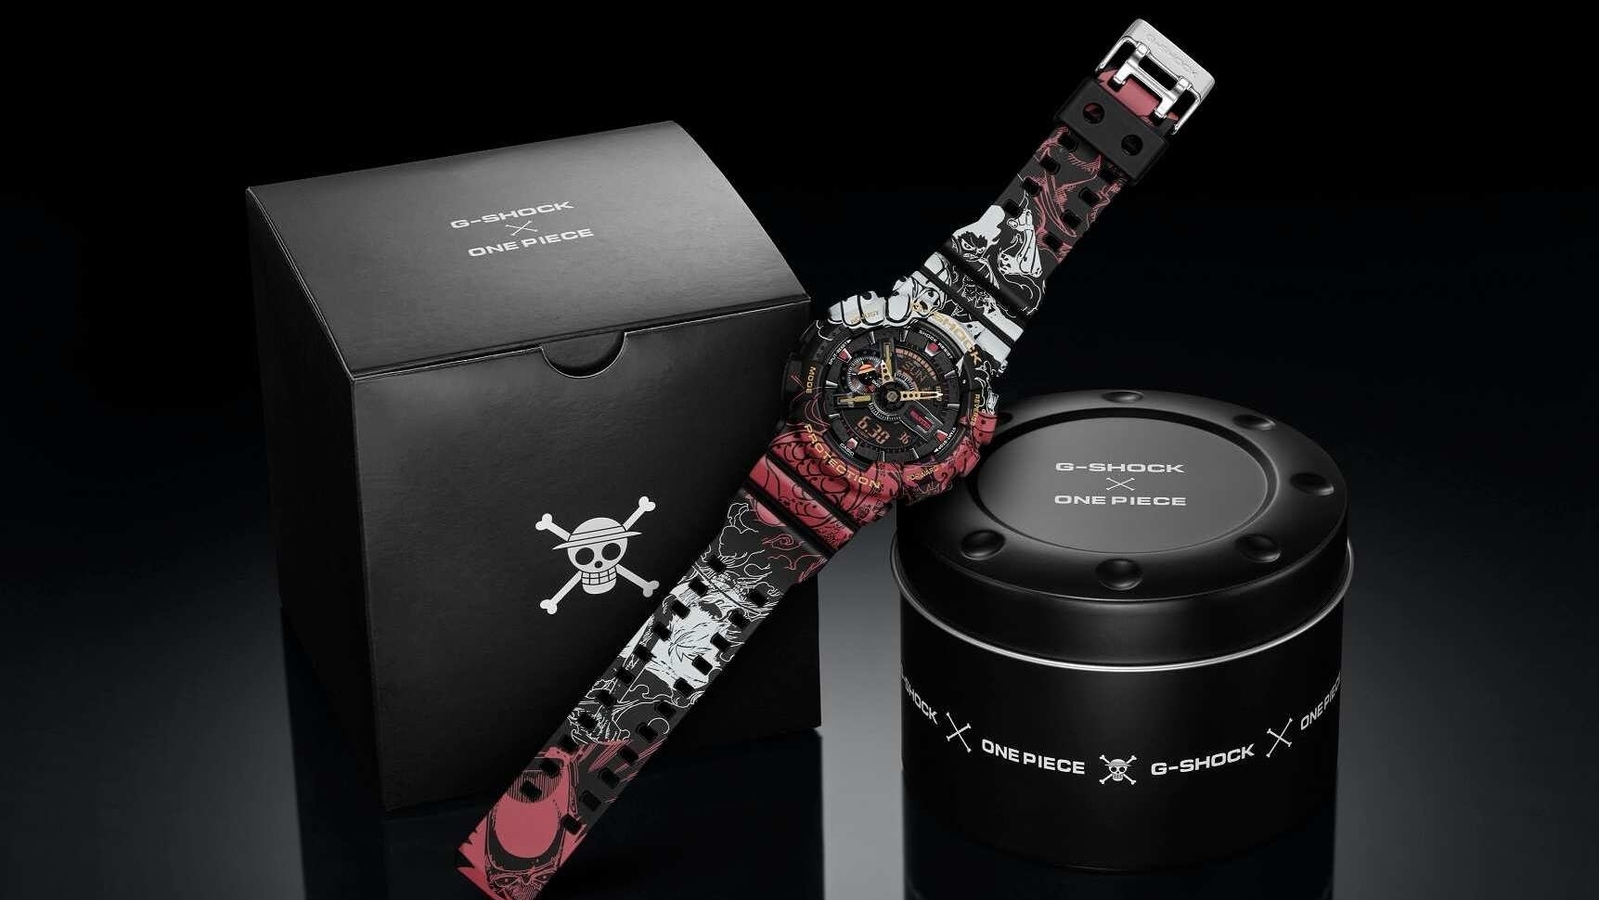 G Shock Announces Limited Edition Watches For Streetwear One Piece Anime Fans Ht Tech